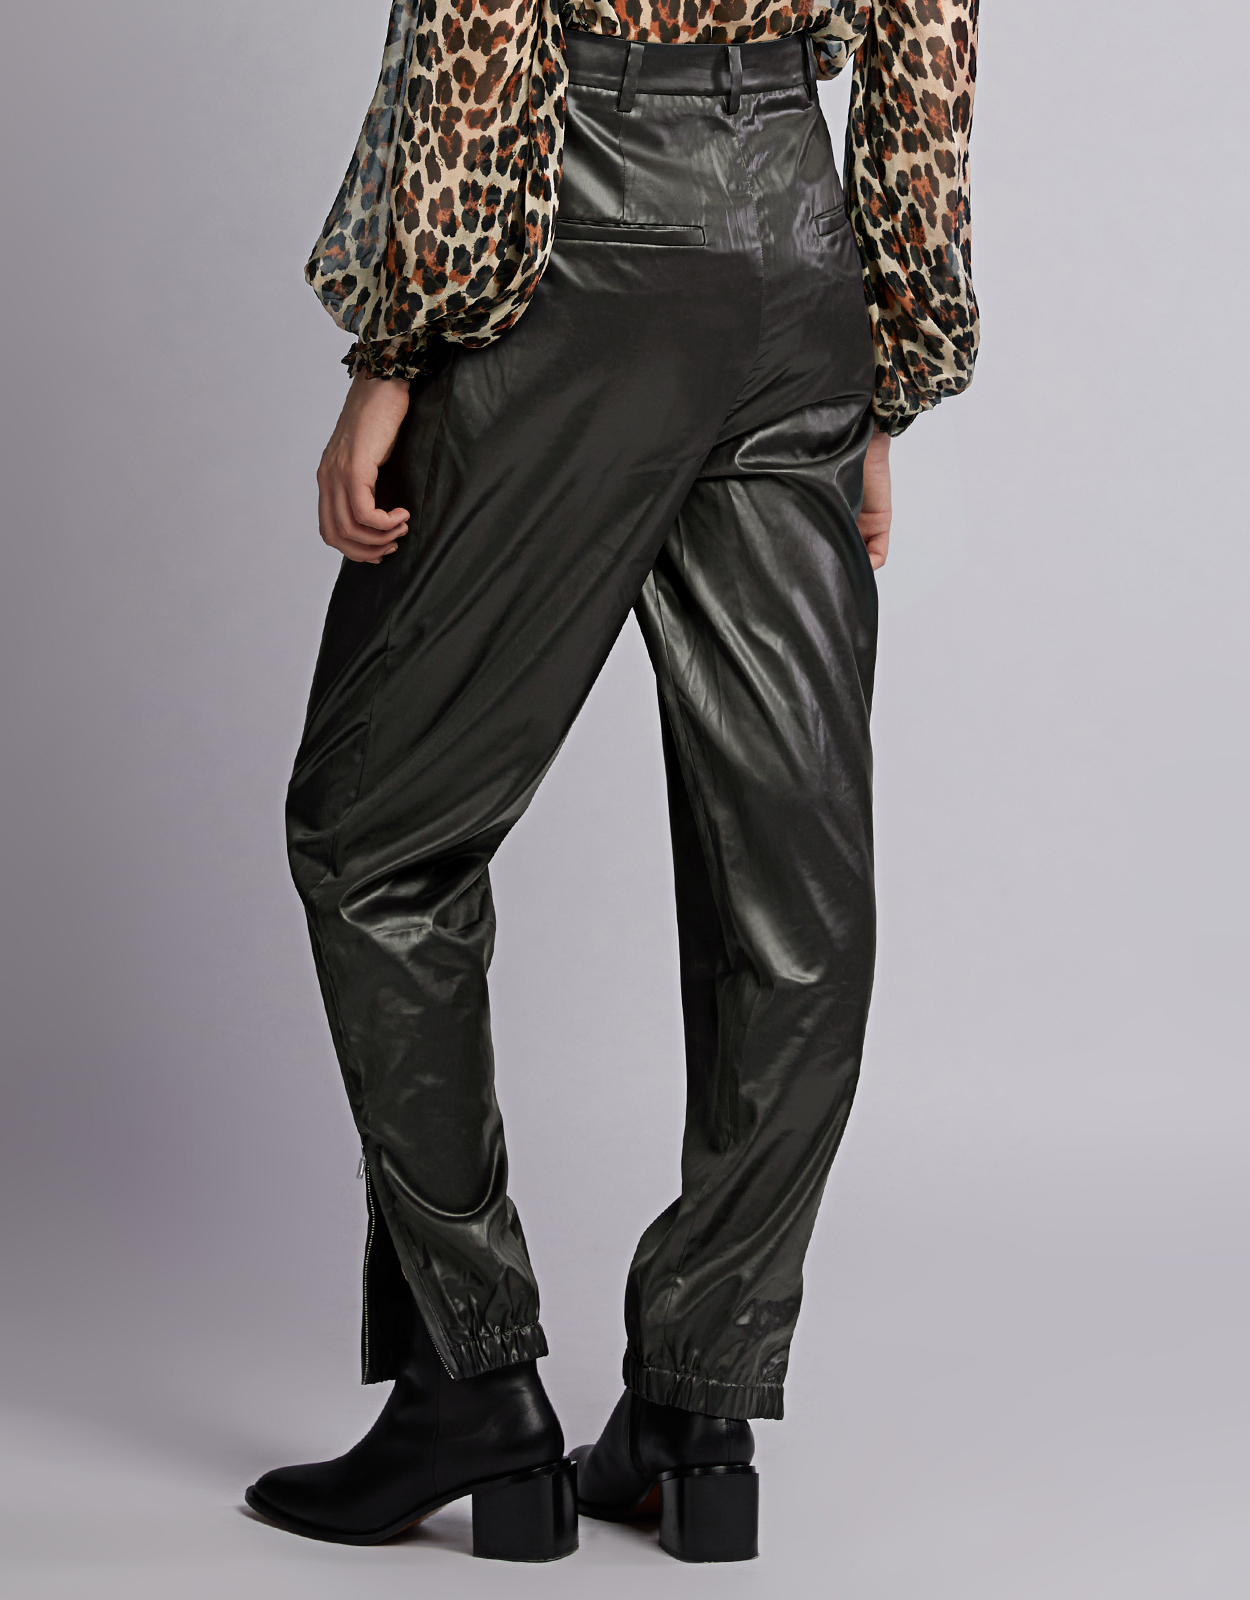 Tibi Pleated Faux Leather Tapered Pants (Pants,Straight Leg) IFCHIC.COM